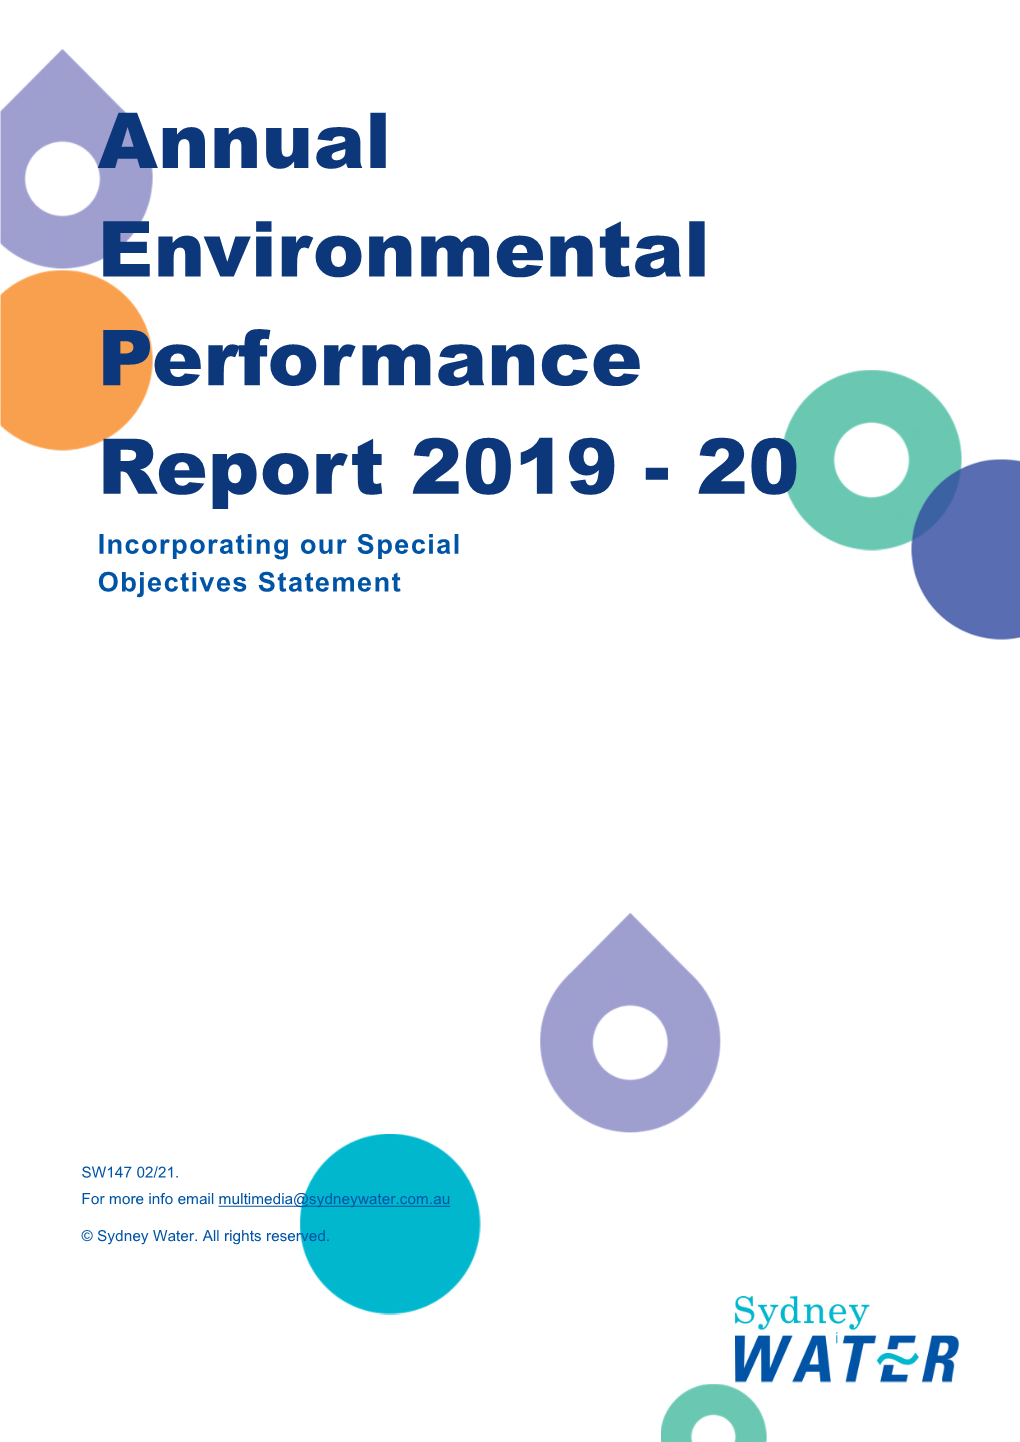 Annual Environmental Performance Report 2019 - 20 Incorporating Our Special Objectives Statement